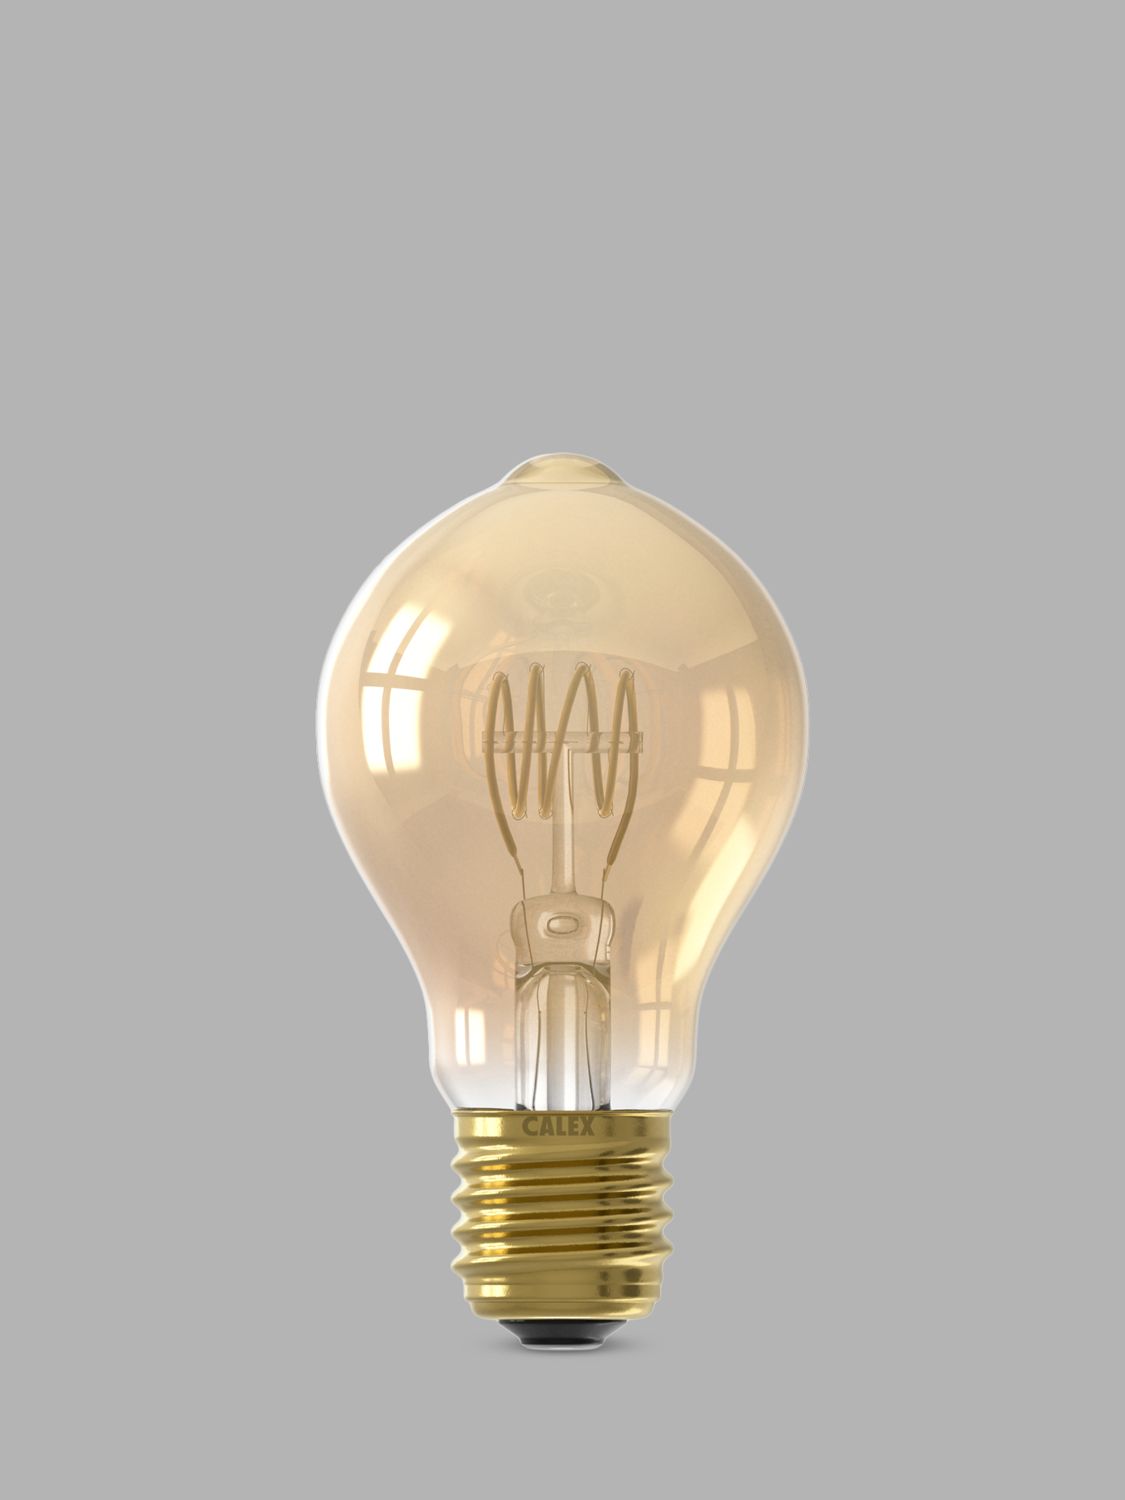 Photo of Calex 3.8w es led curly filament dimmable a60 bulb gold